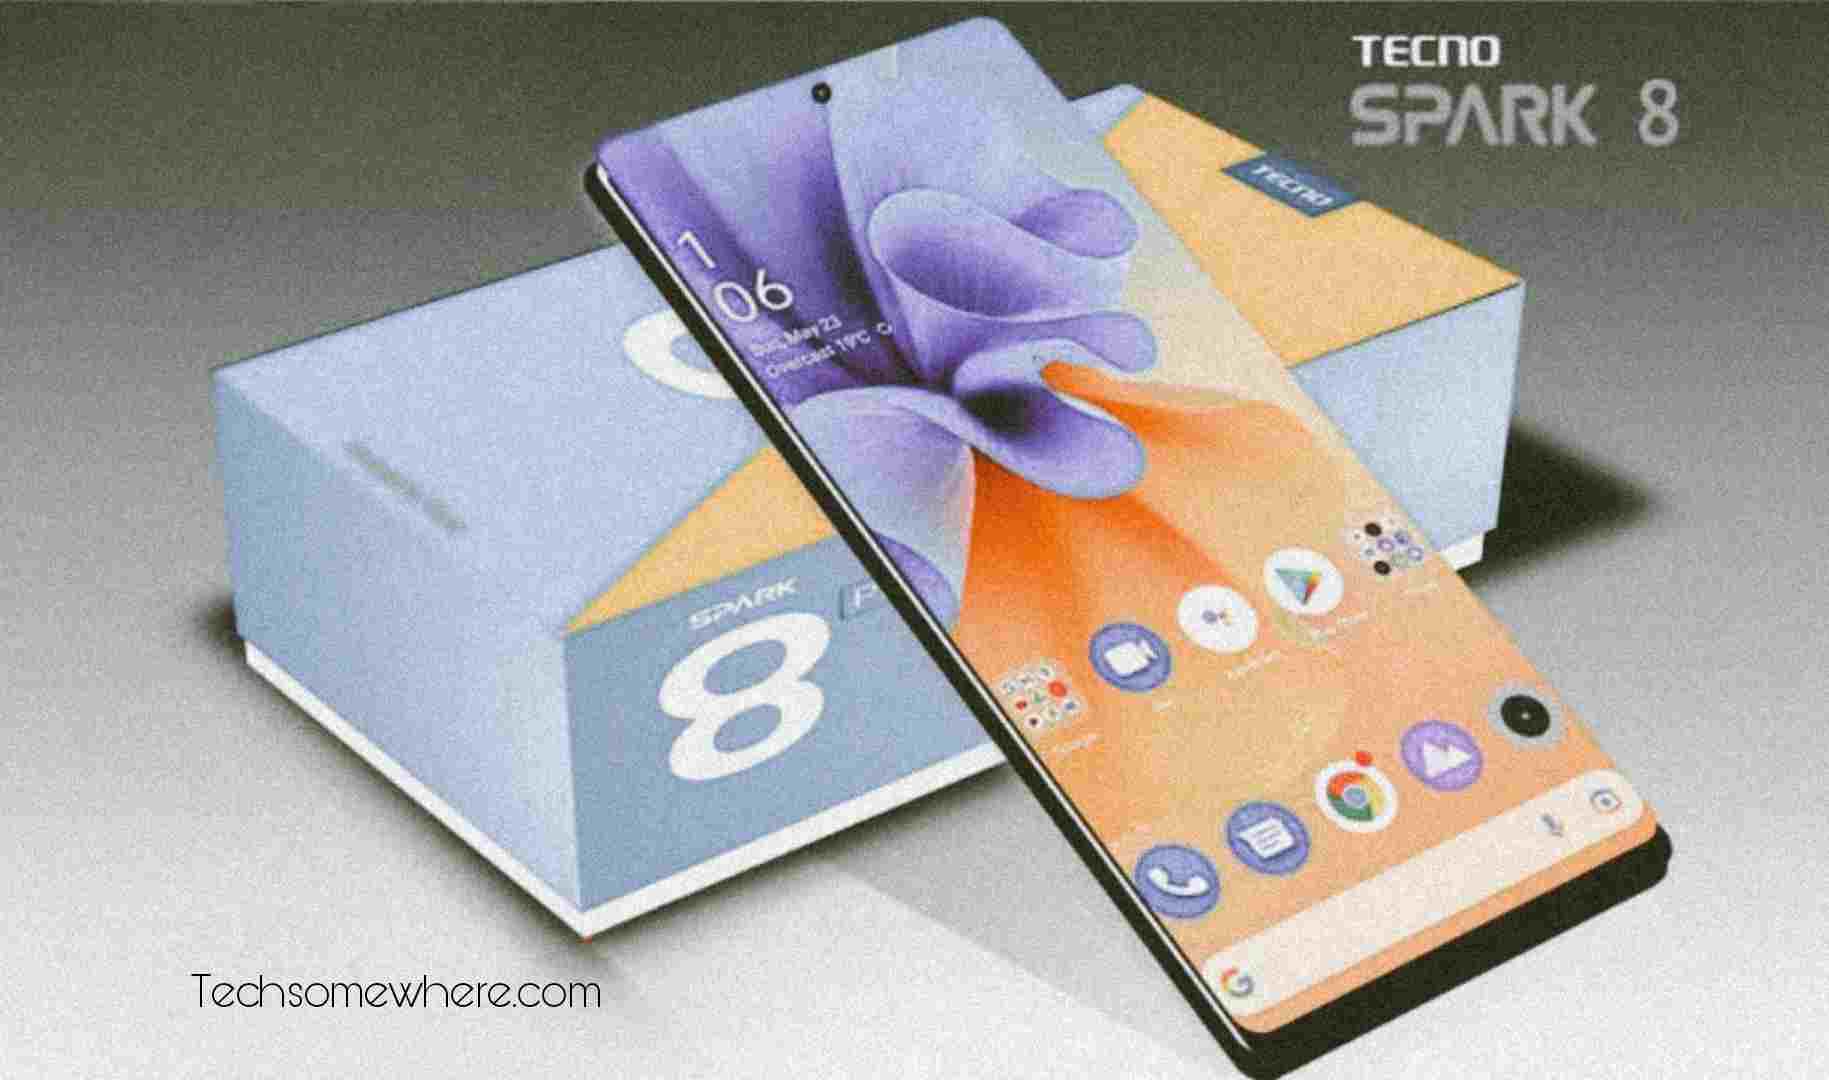 Amazing Tecno Spark 8 Price, Amazing Specification And Release Date!